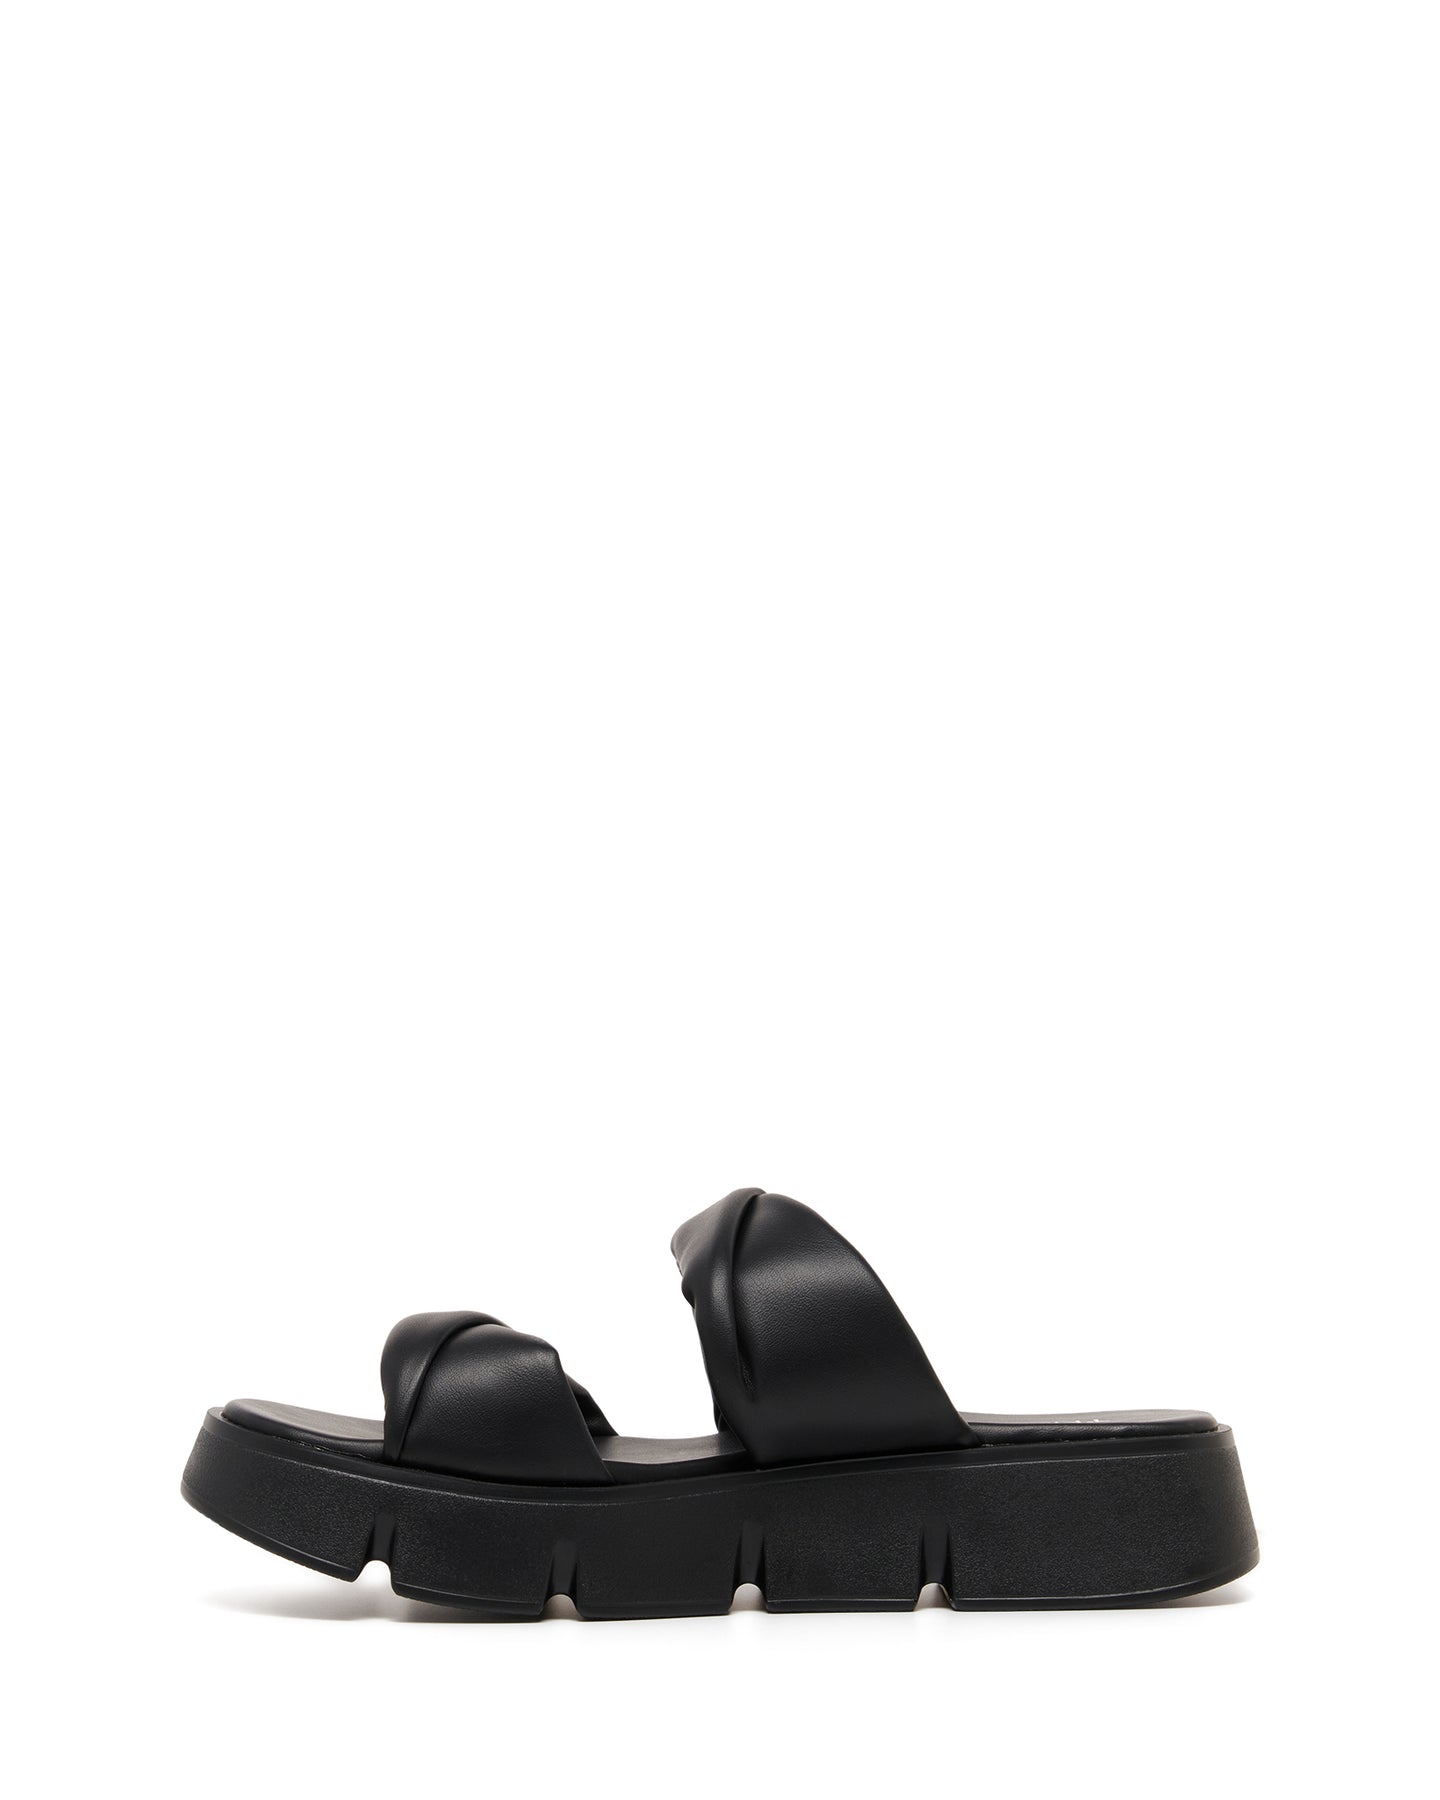 Therapy Shoes Maxie Black Smooth, Women's Sandals, Slides